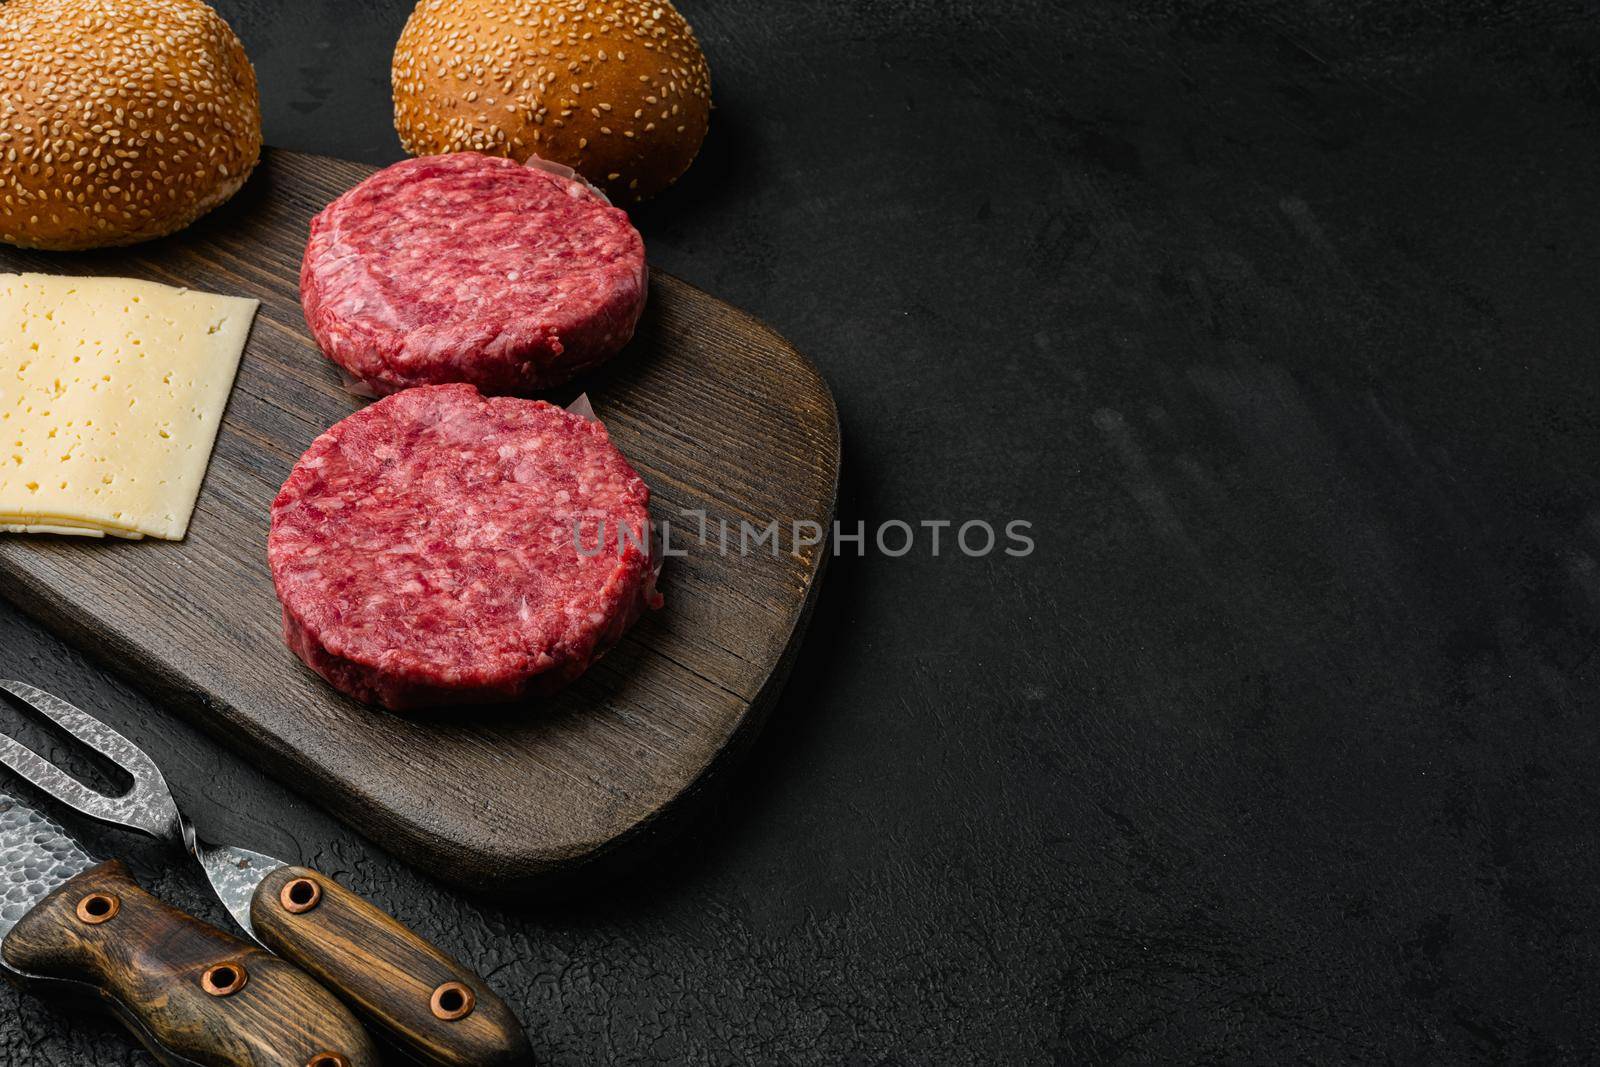 Burger patty on black dark stone table background, with copy space for text by Ilianesolenyi